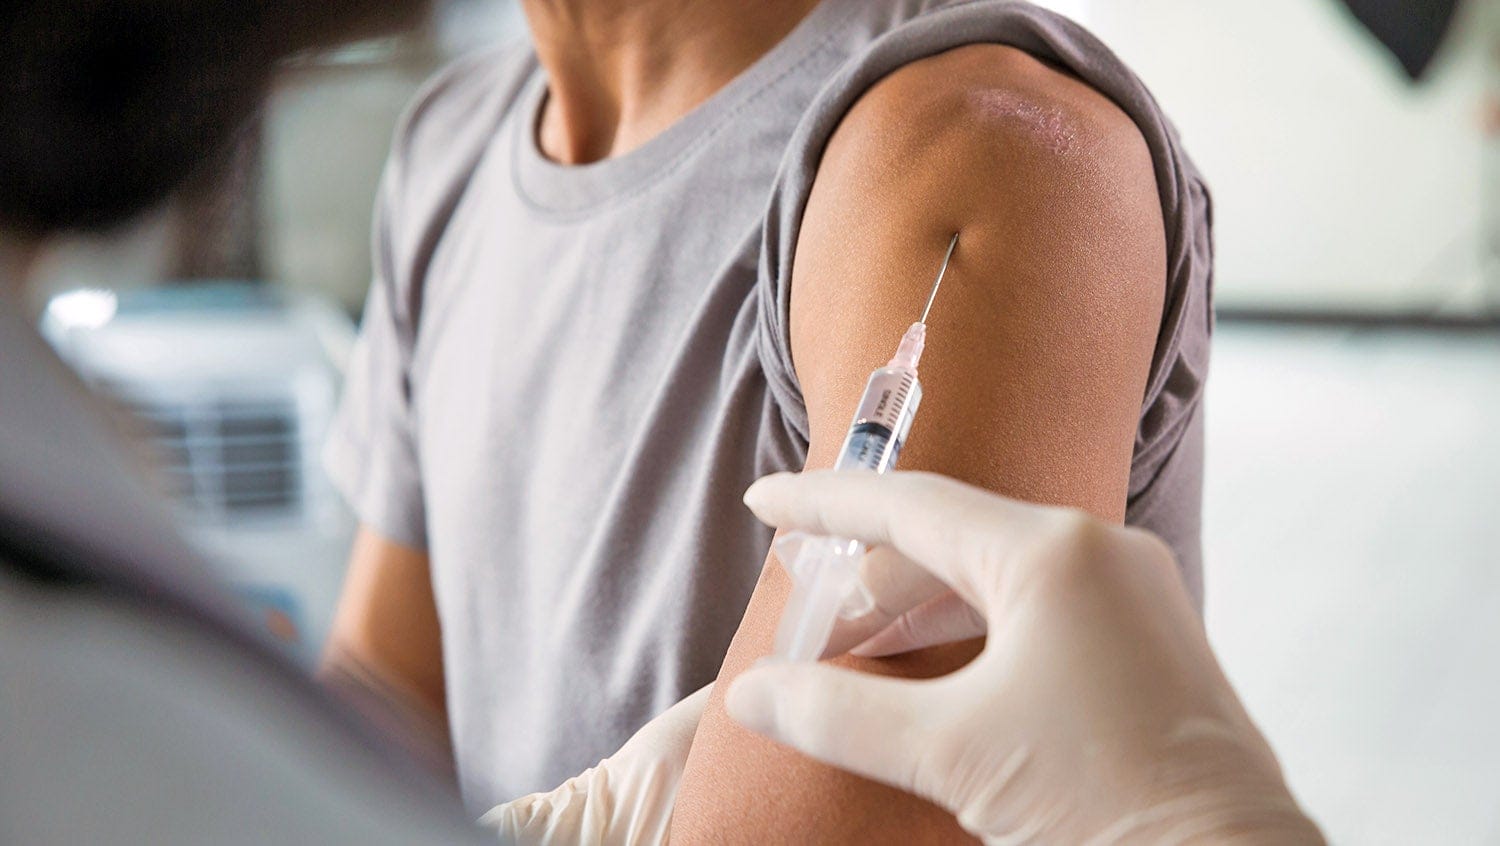 Mass vaccination for hepatitis A in the emergency department has greatly reduced the outbreak in Massachusetts.